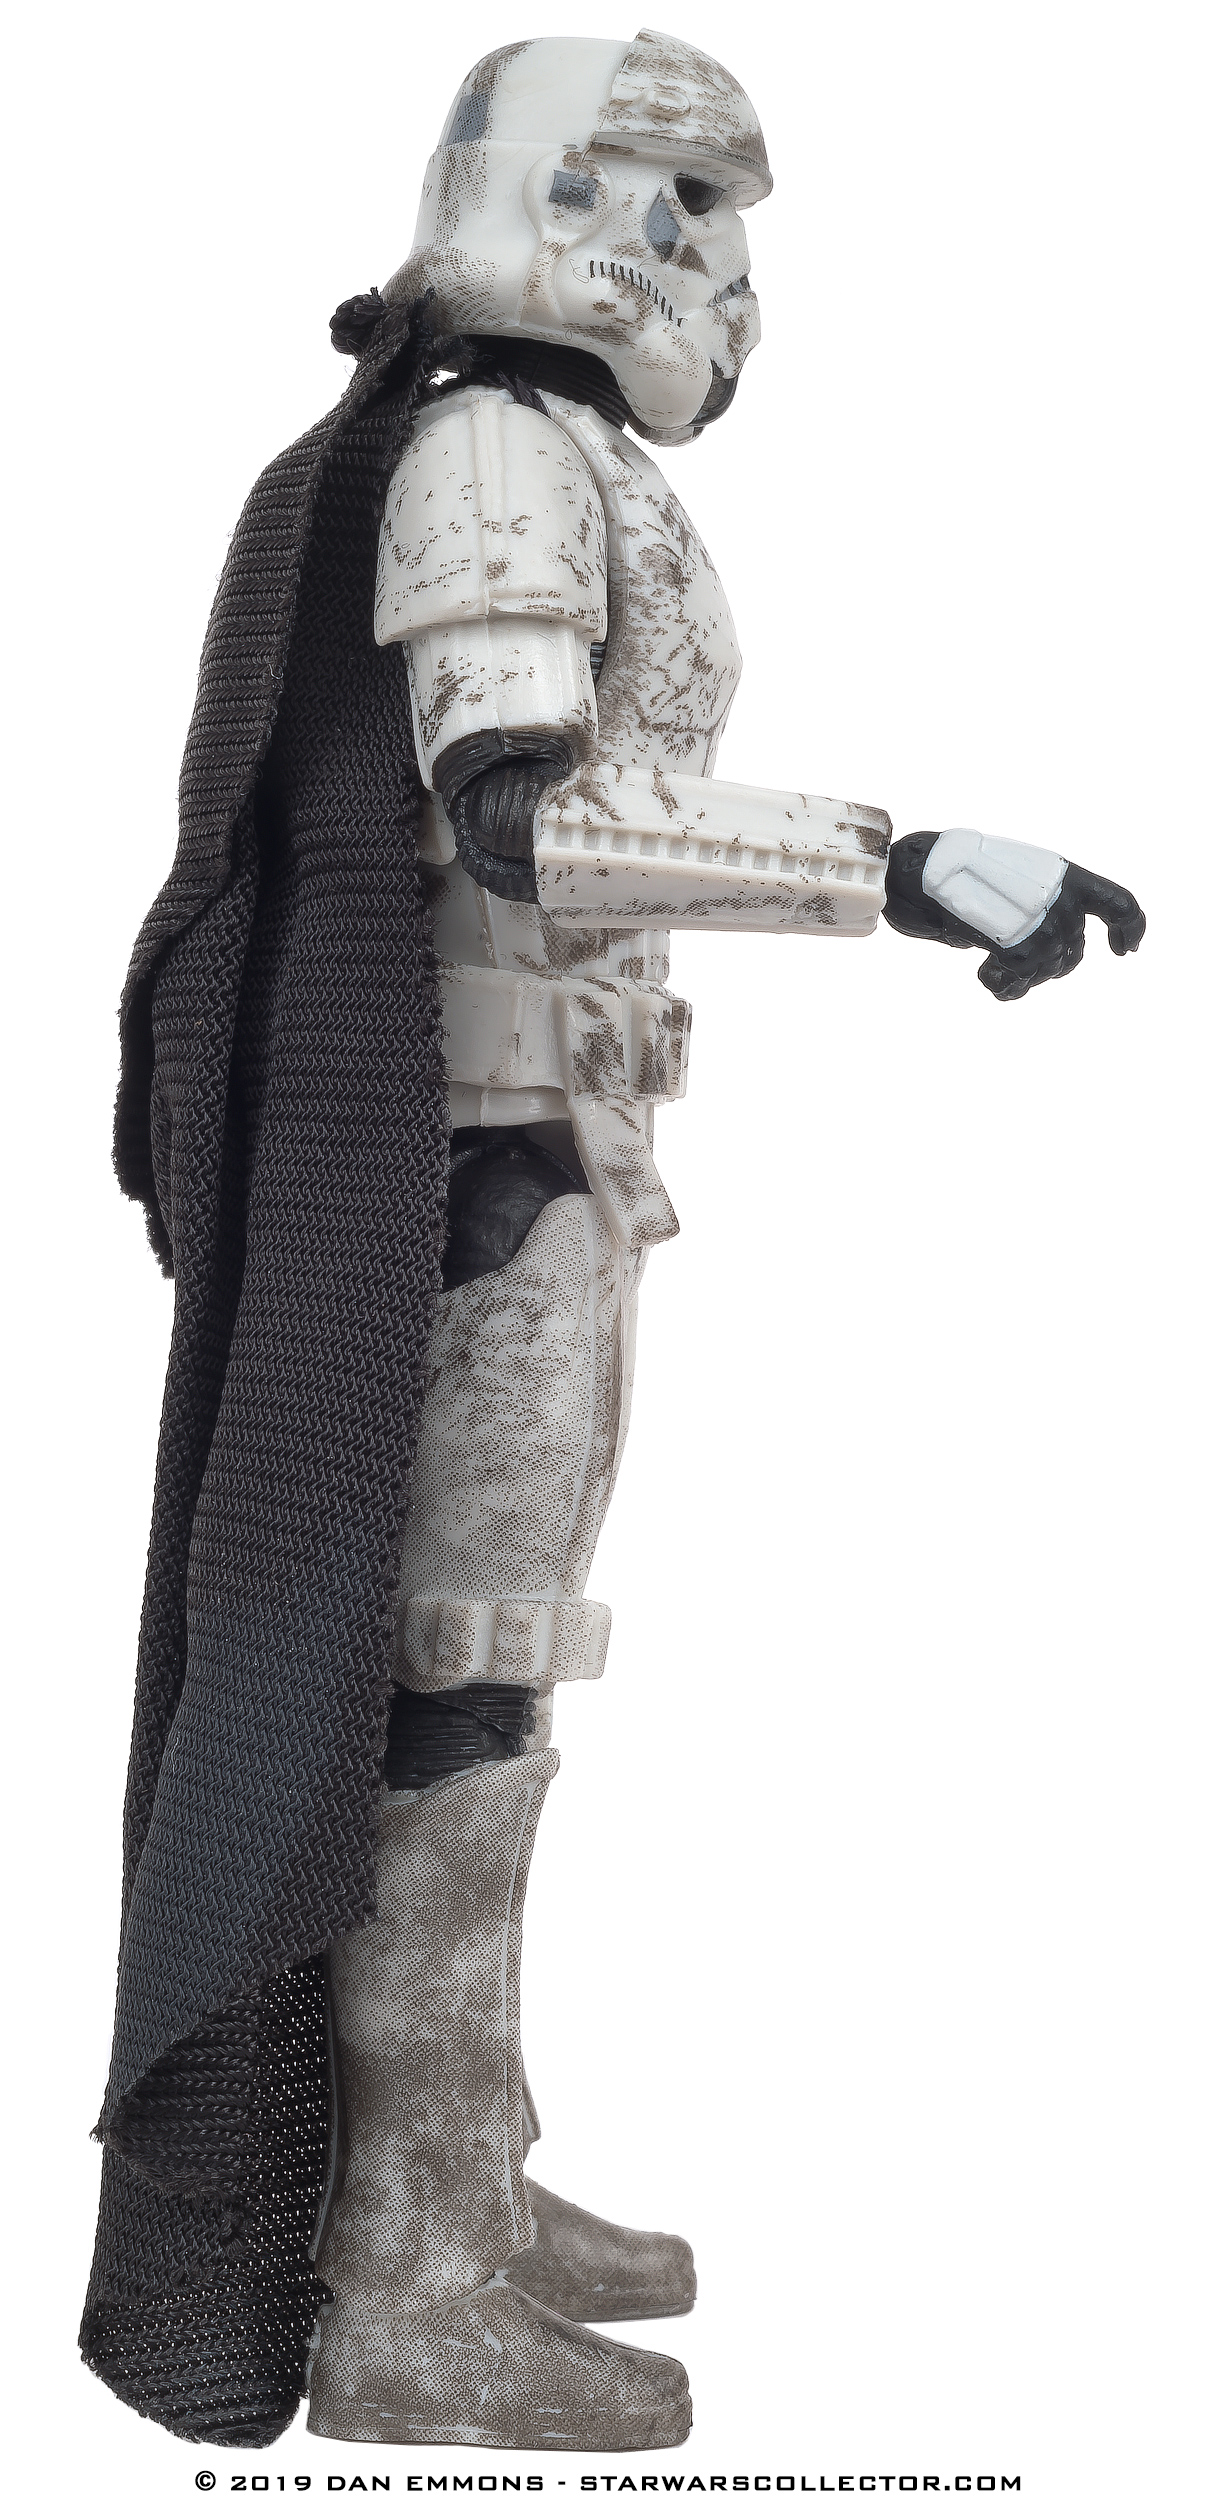 The Vintage Collection – Exclusive – VC123: Stormtrooper (Mimban)